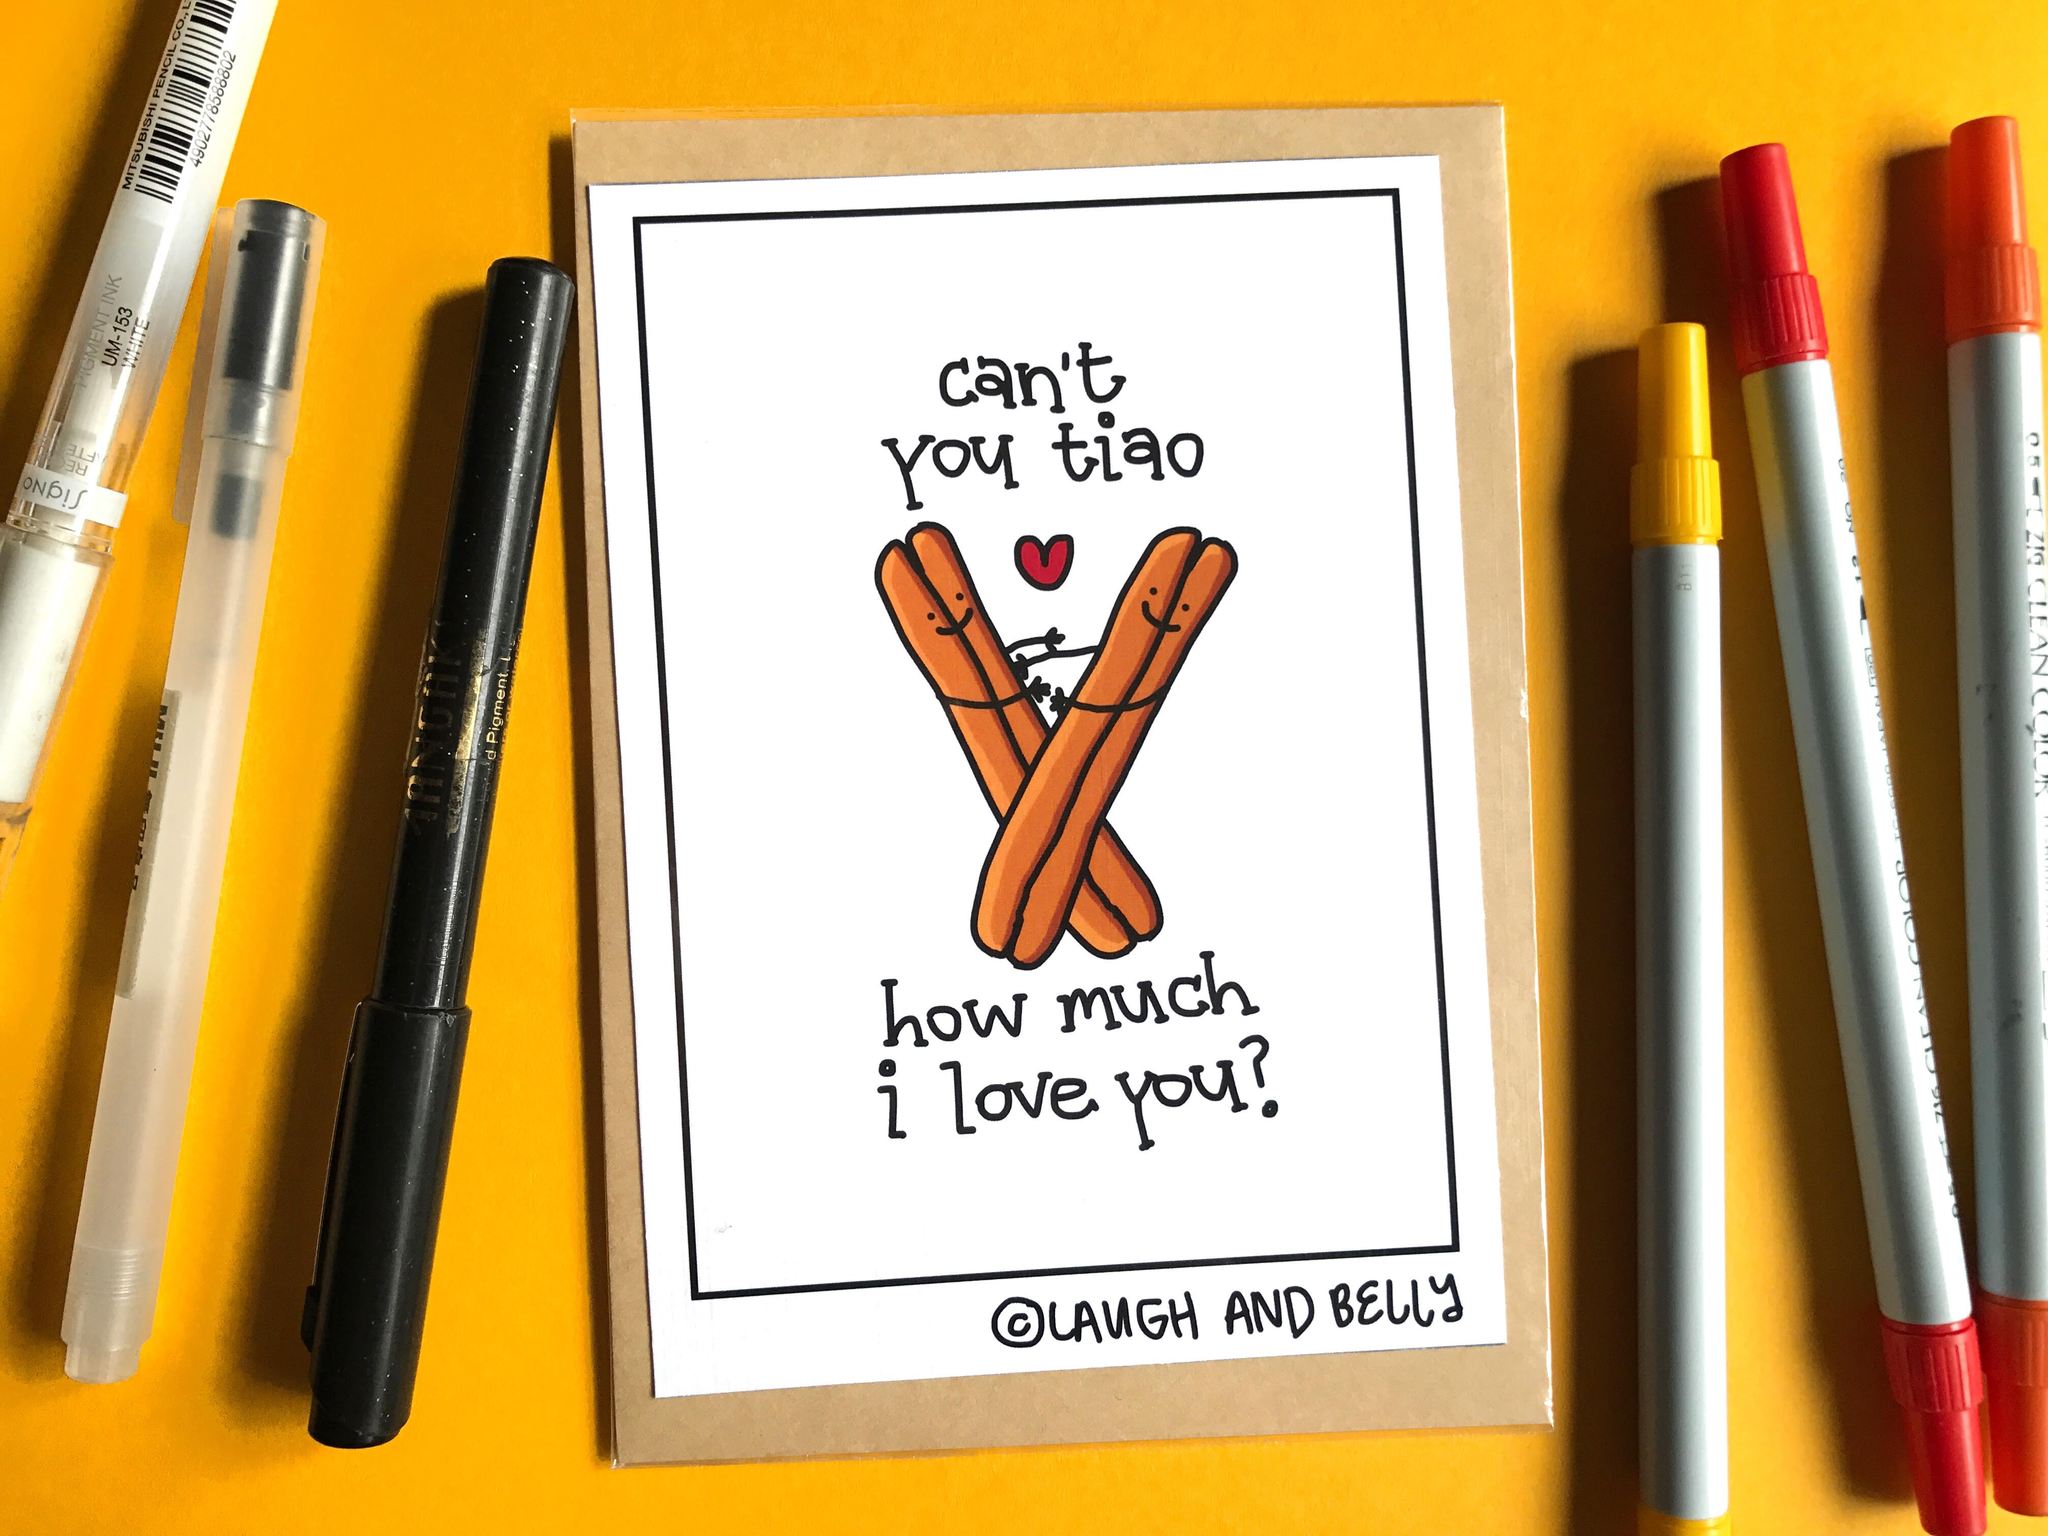 Tan Siqi’s pun-tastic illustrations are on cards that she sells on her website for S$6. (Photo: @laughandbelly / Instagram)